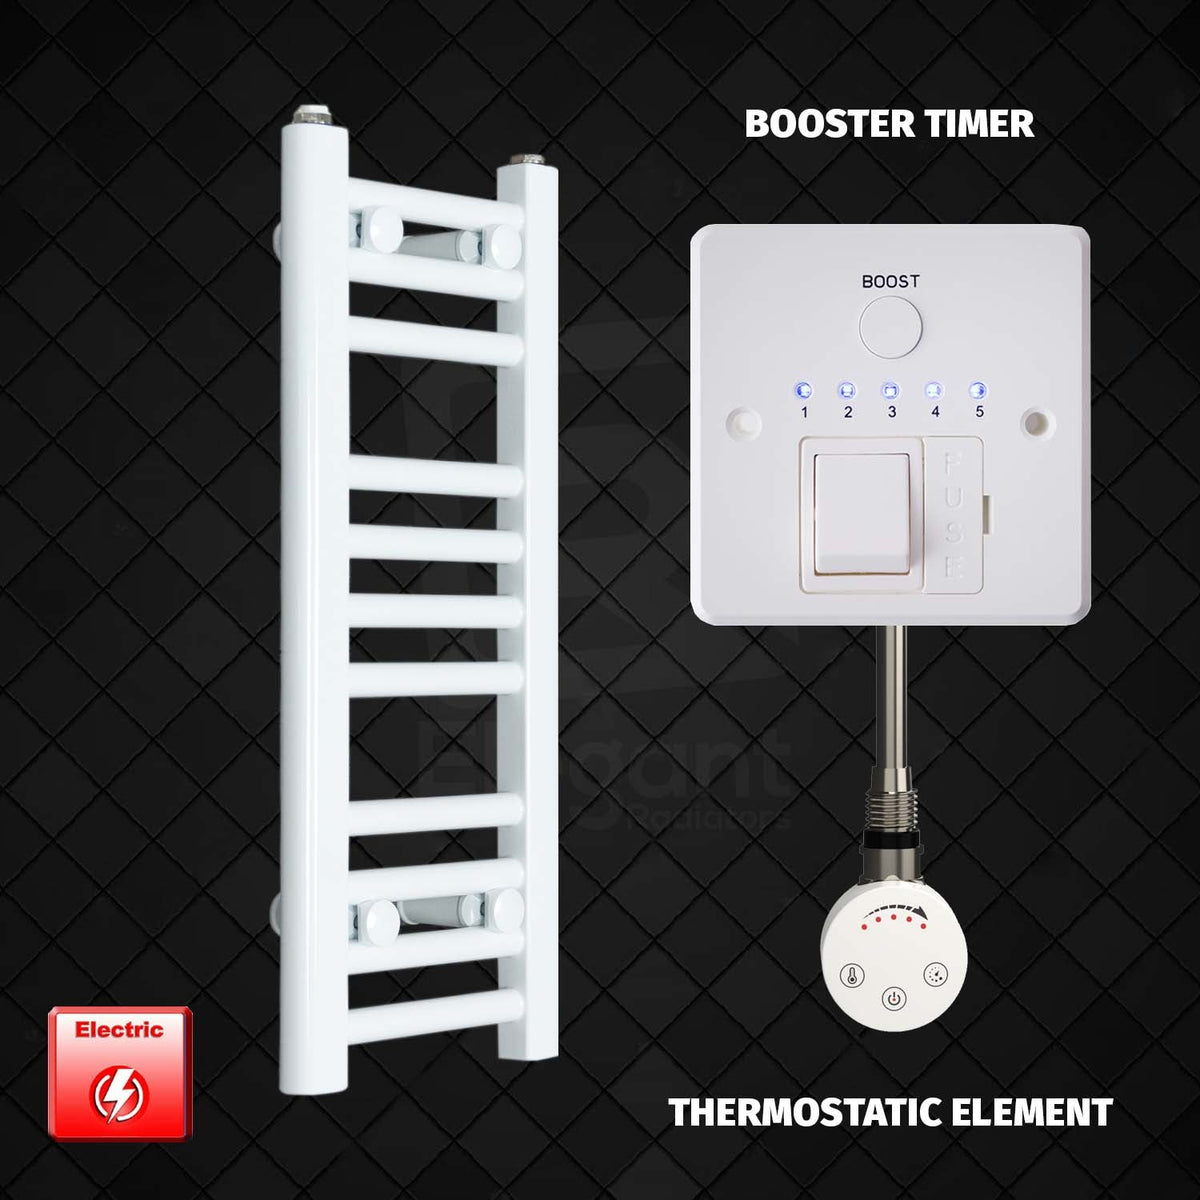 600 mm High 300 mm Wide Pre-Filled Electric Heated Towel Rail Radiator White Smart Thermostatic Element Booster Timer